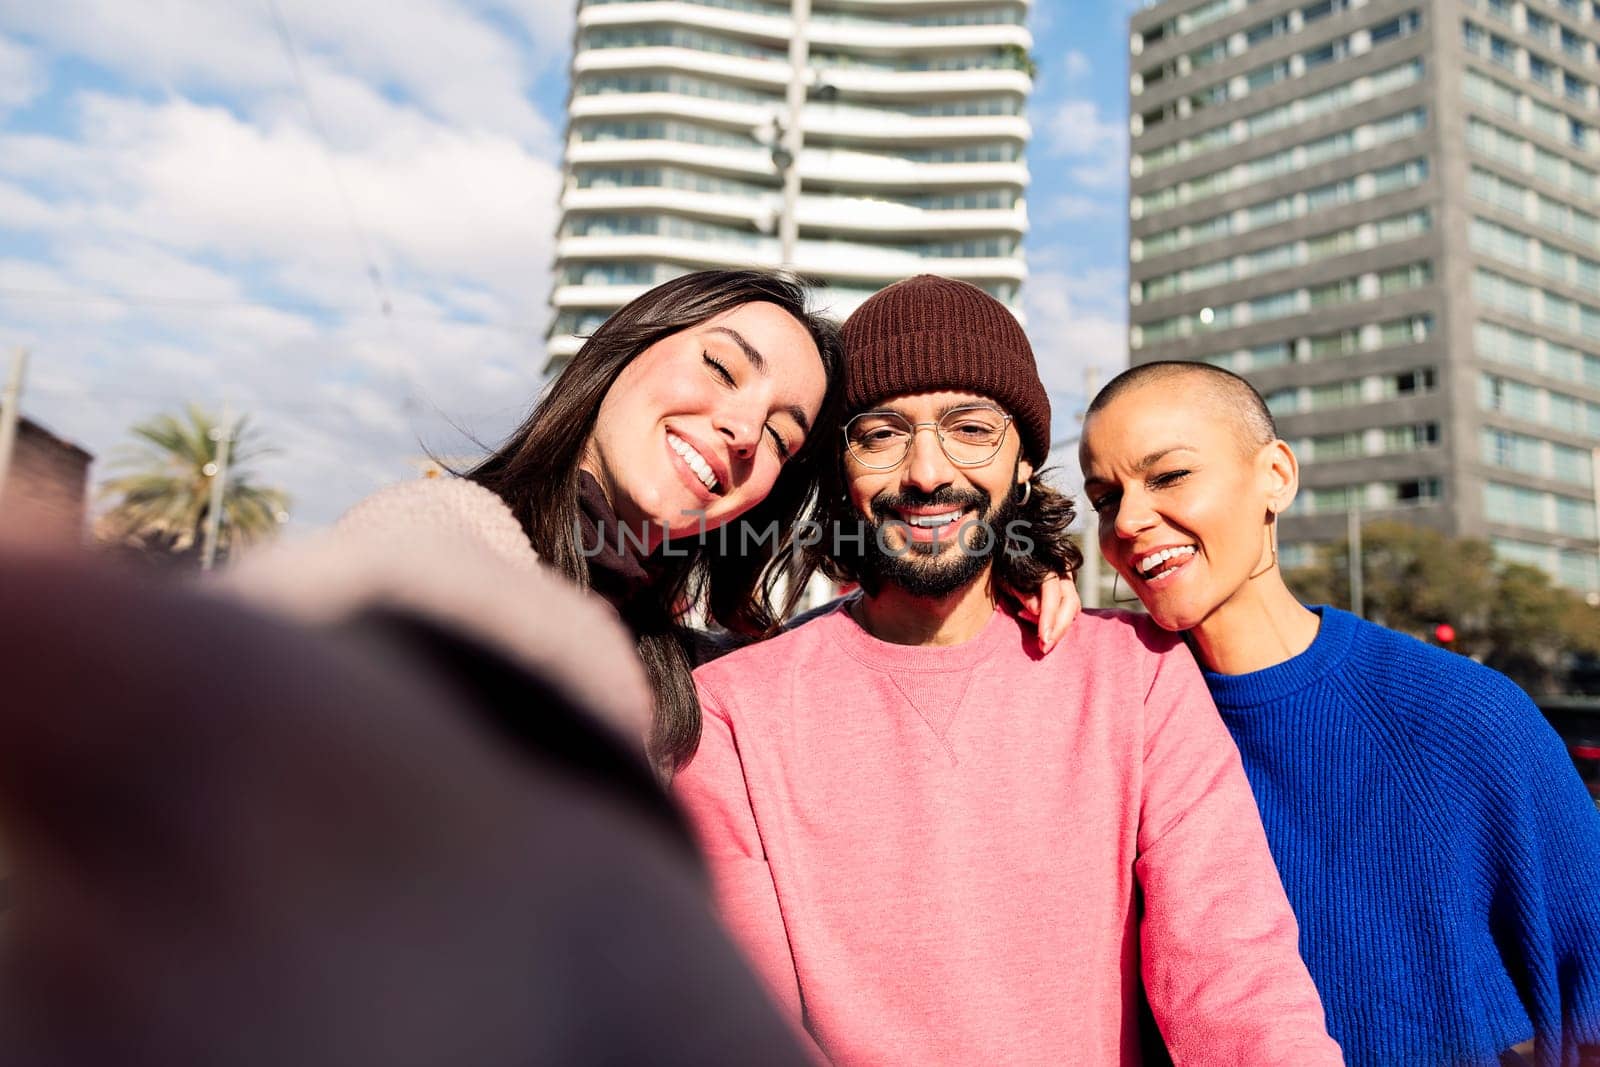 selfie photo of three happy friends smiling in the city, concept of friendship and urban lifestyle